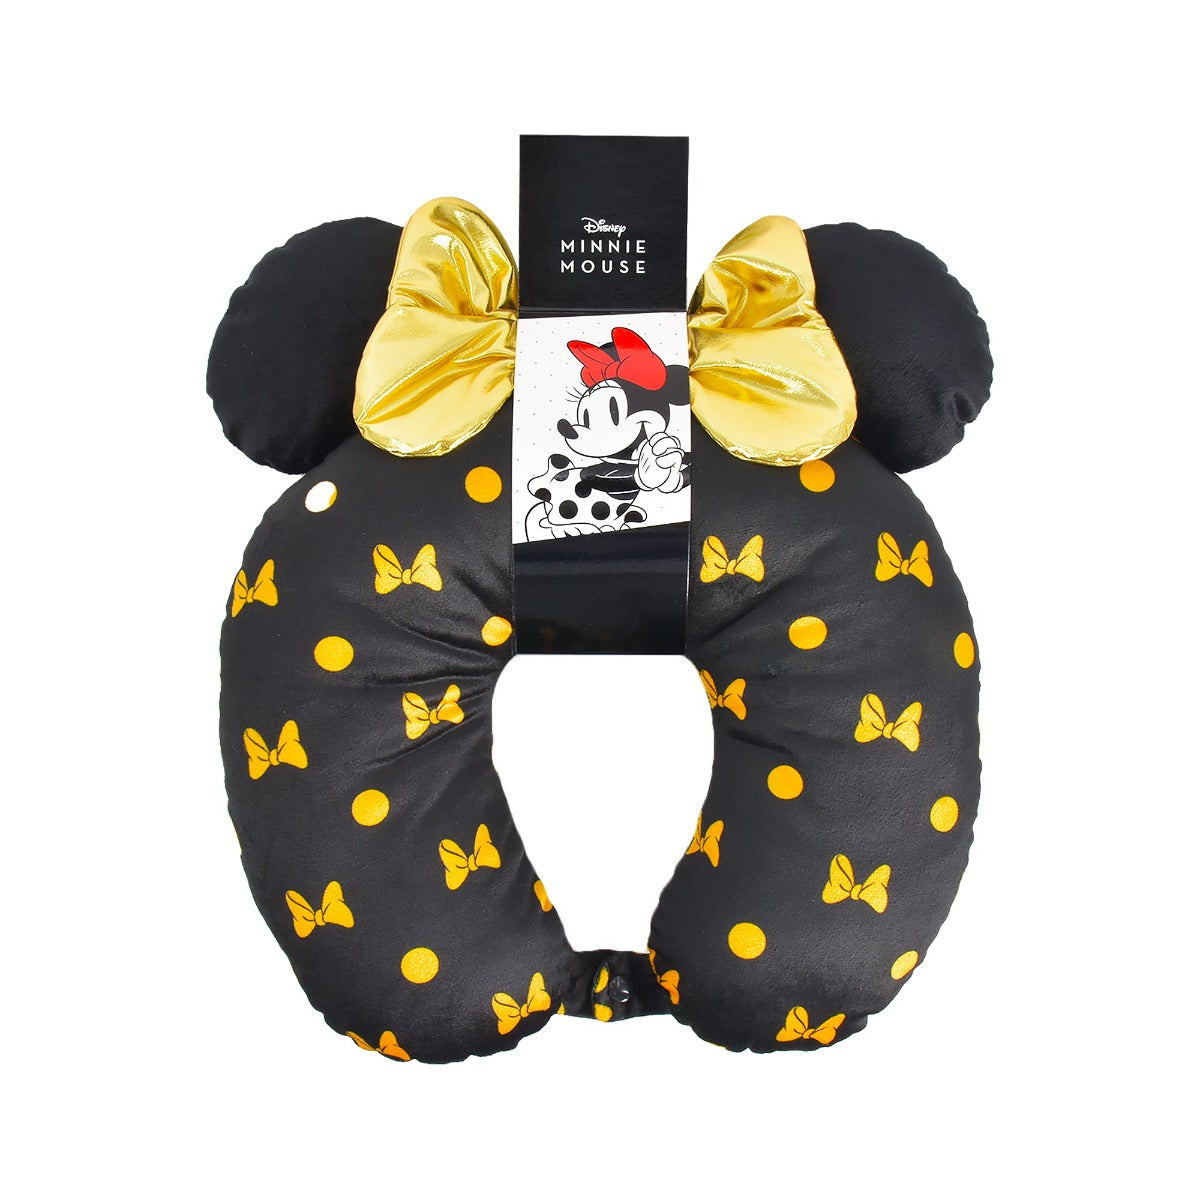 Ful Disney Minnie Mouse black and gold with 3D ears and bow - best neck pillows for travel